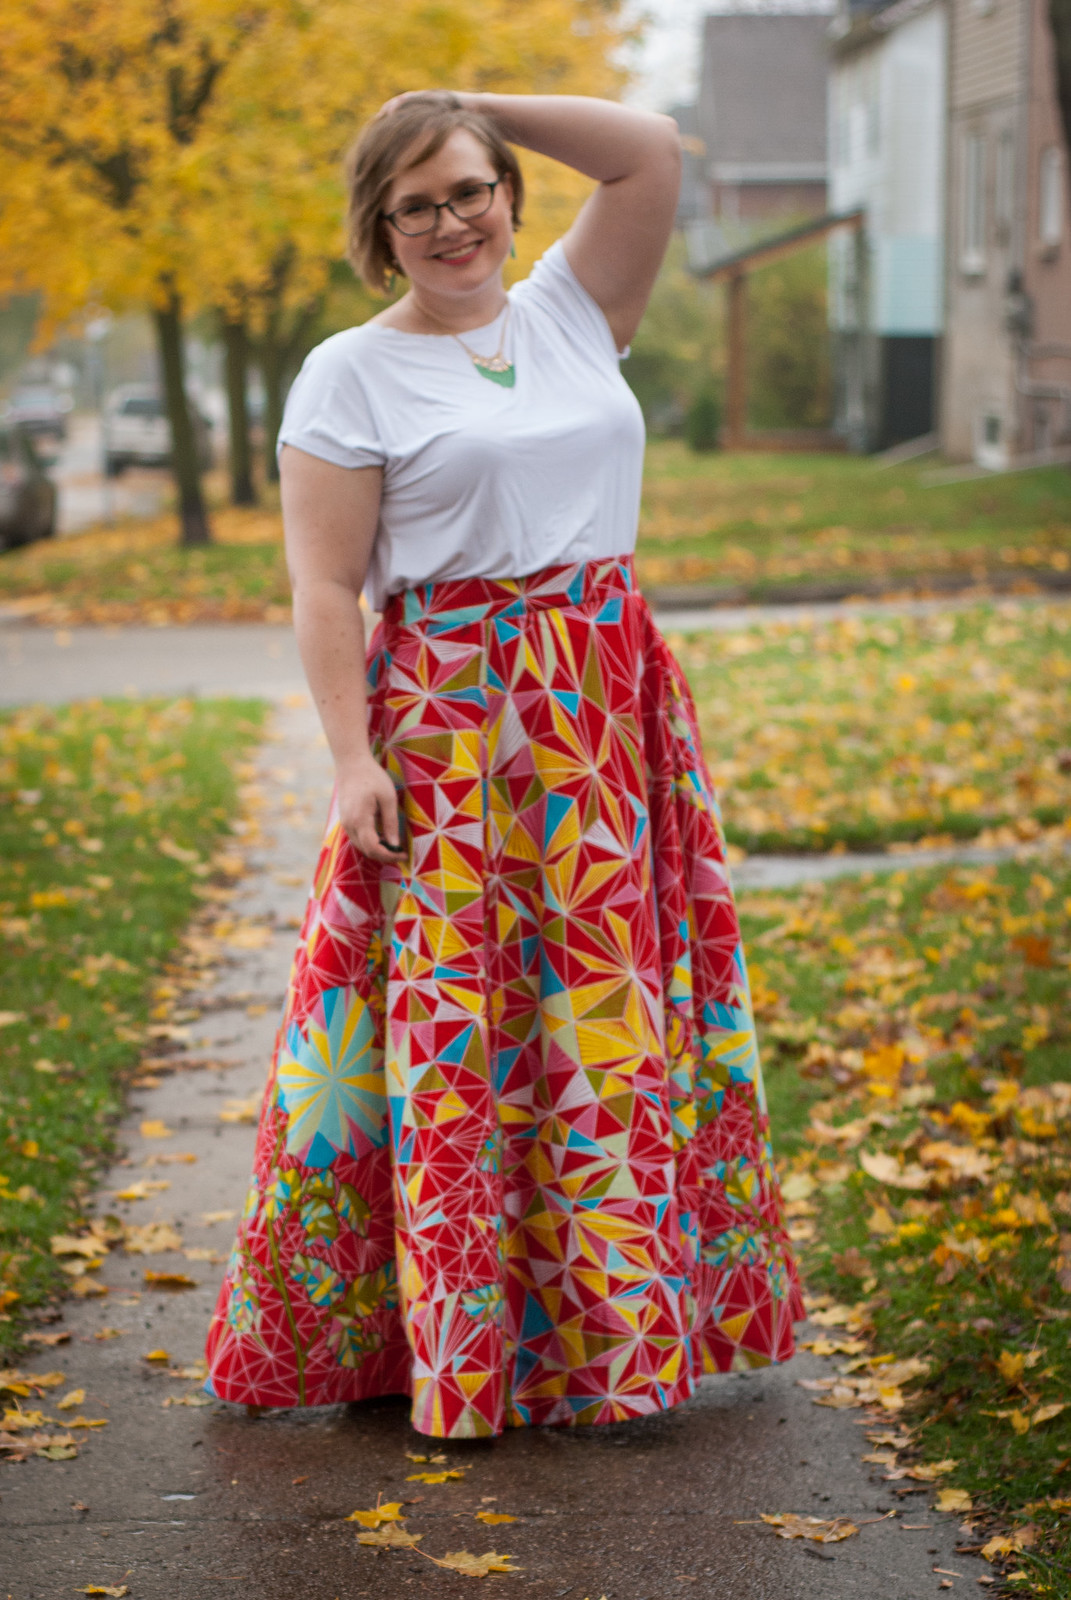 cheryl ogle add african skirts images photo